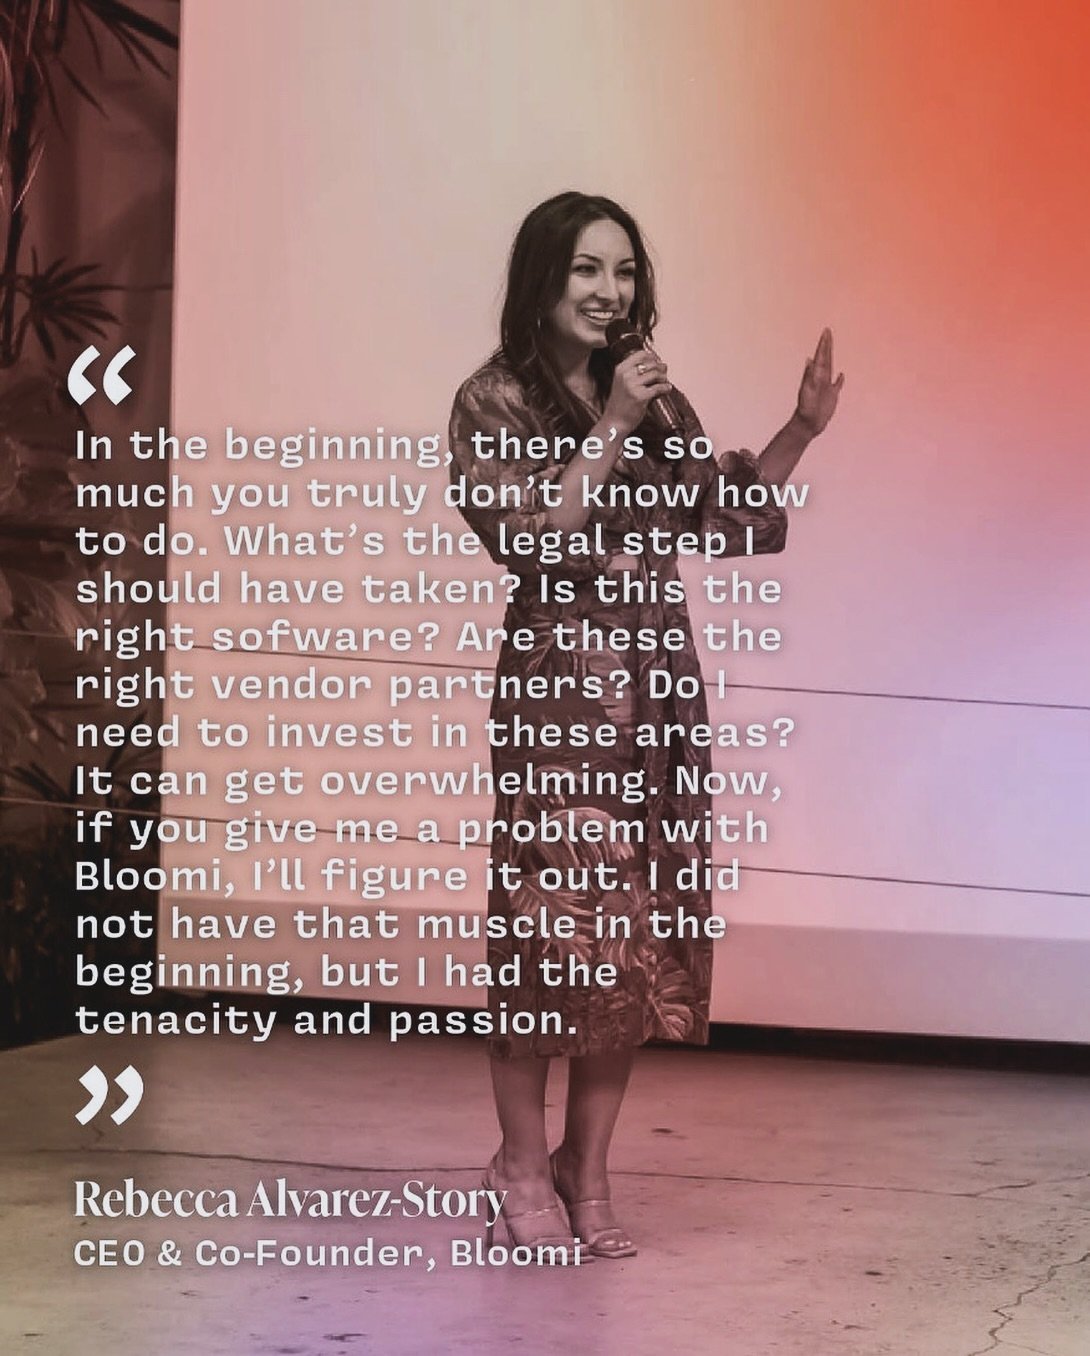 Embrace the journey: @rebeccaalvarezstory shares the highs and lows of entrepreneurship, reminding us that passion fuels every step forward. Shout out to @weallgrowlatina for covering Rebecca&rsquo;s story. #BloomiFounder #EntrepreneurialJourney 🌱✨